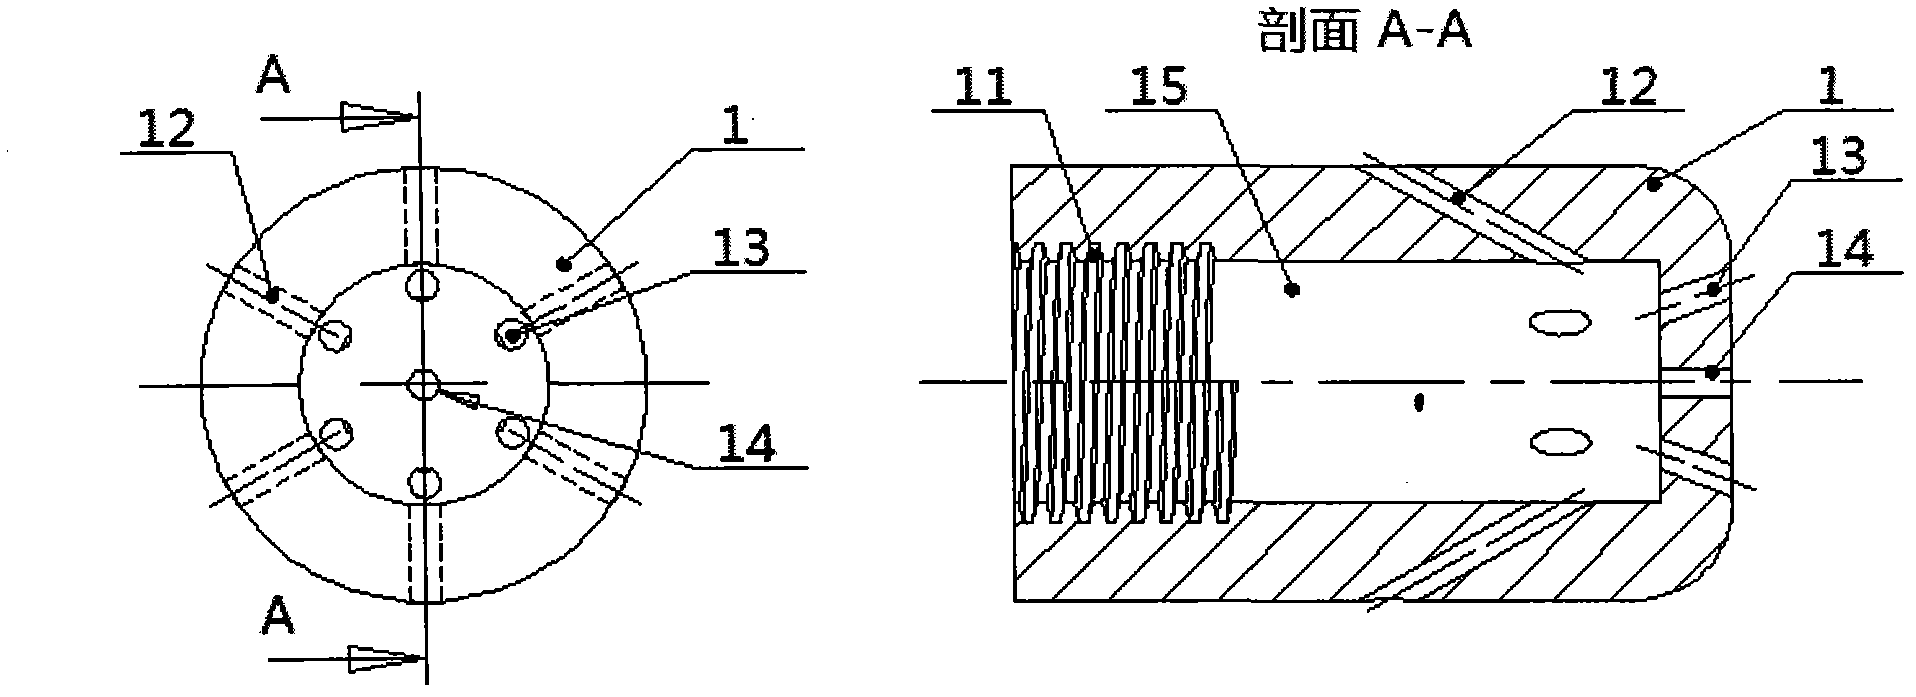 Multi-orifice nozzle device with rock breaking and self-propelling modes